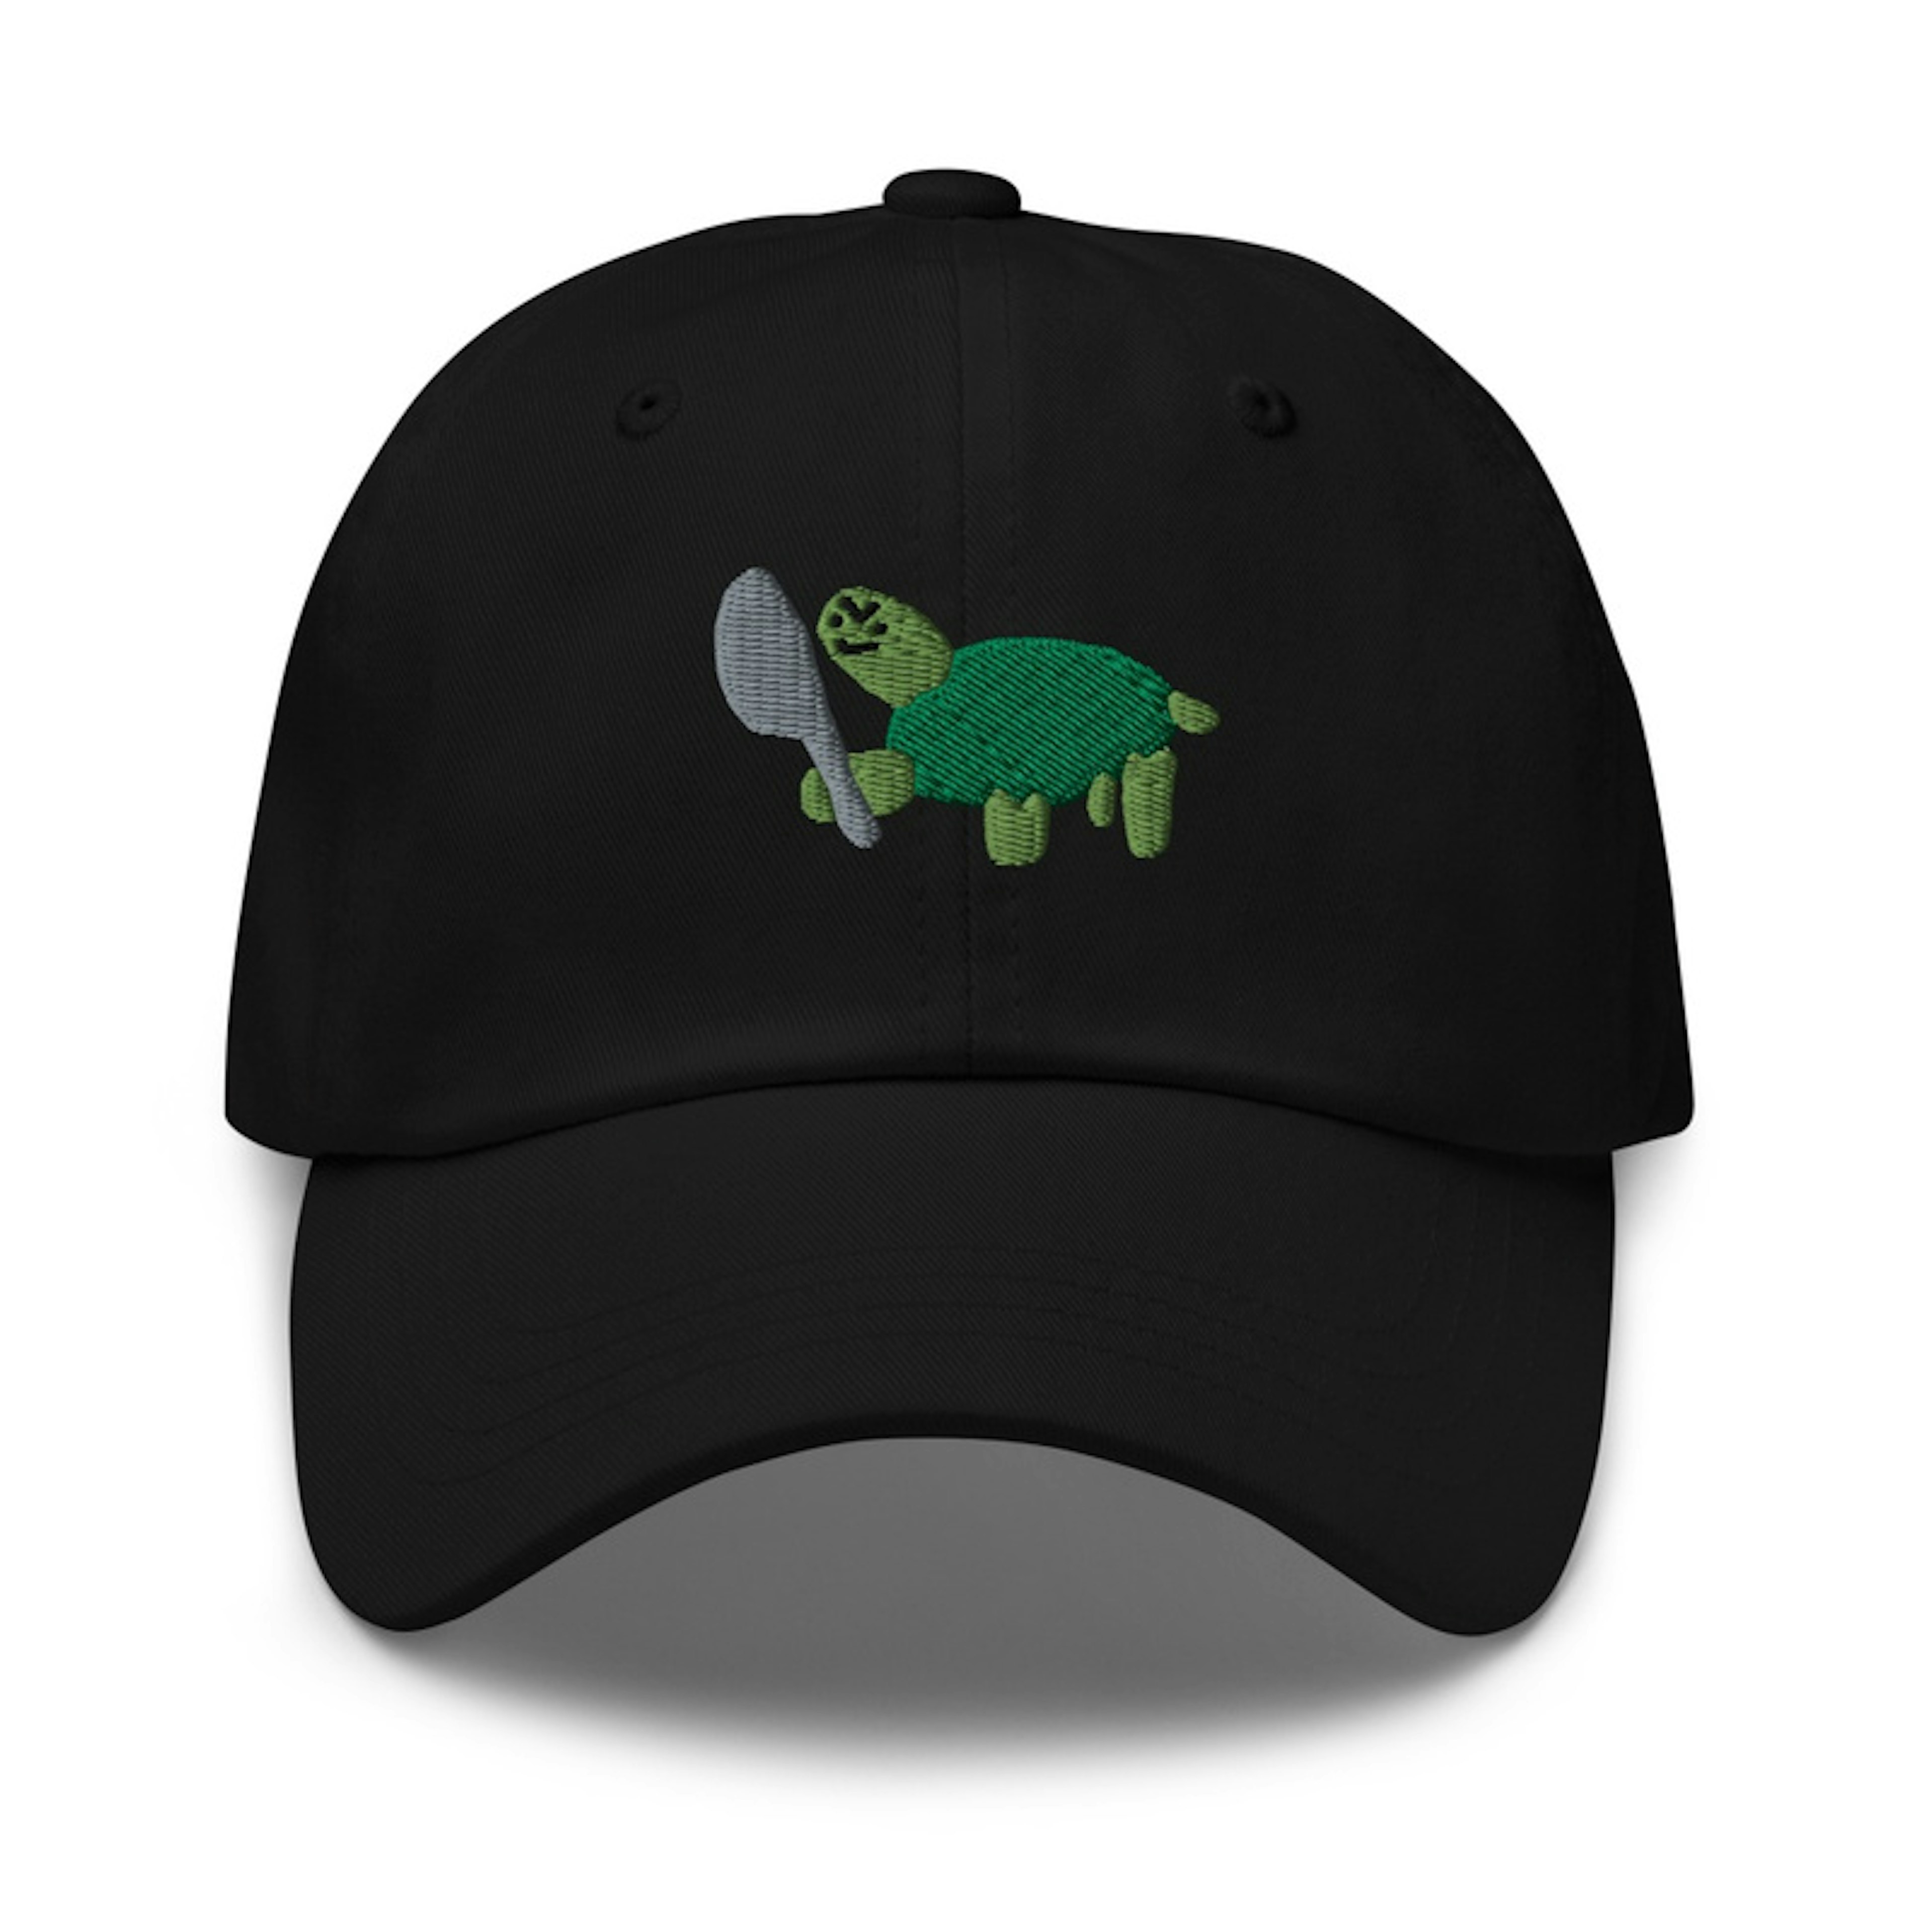 ALL HAIL THE TURTLES HAT